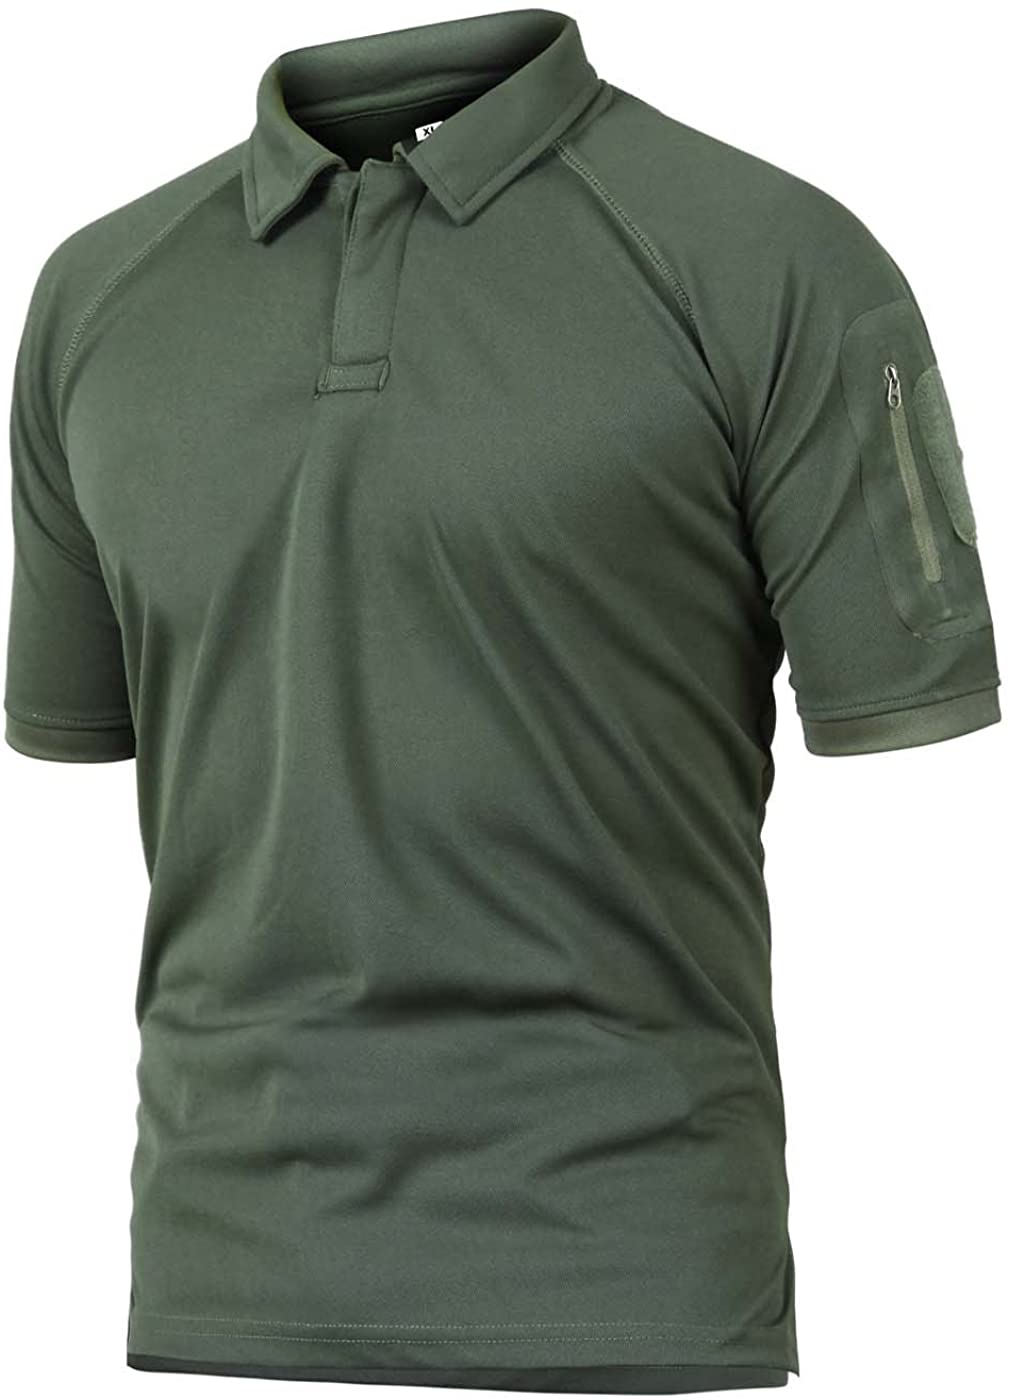 SHADOW STRATEGIC Olive Drab Tactical Polo